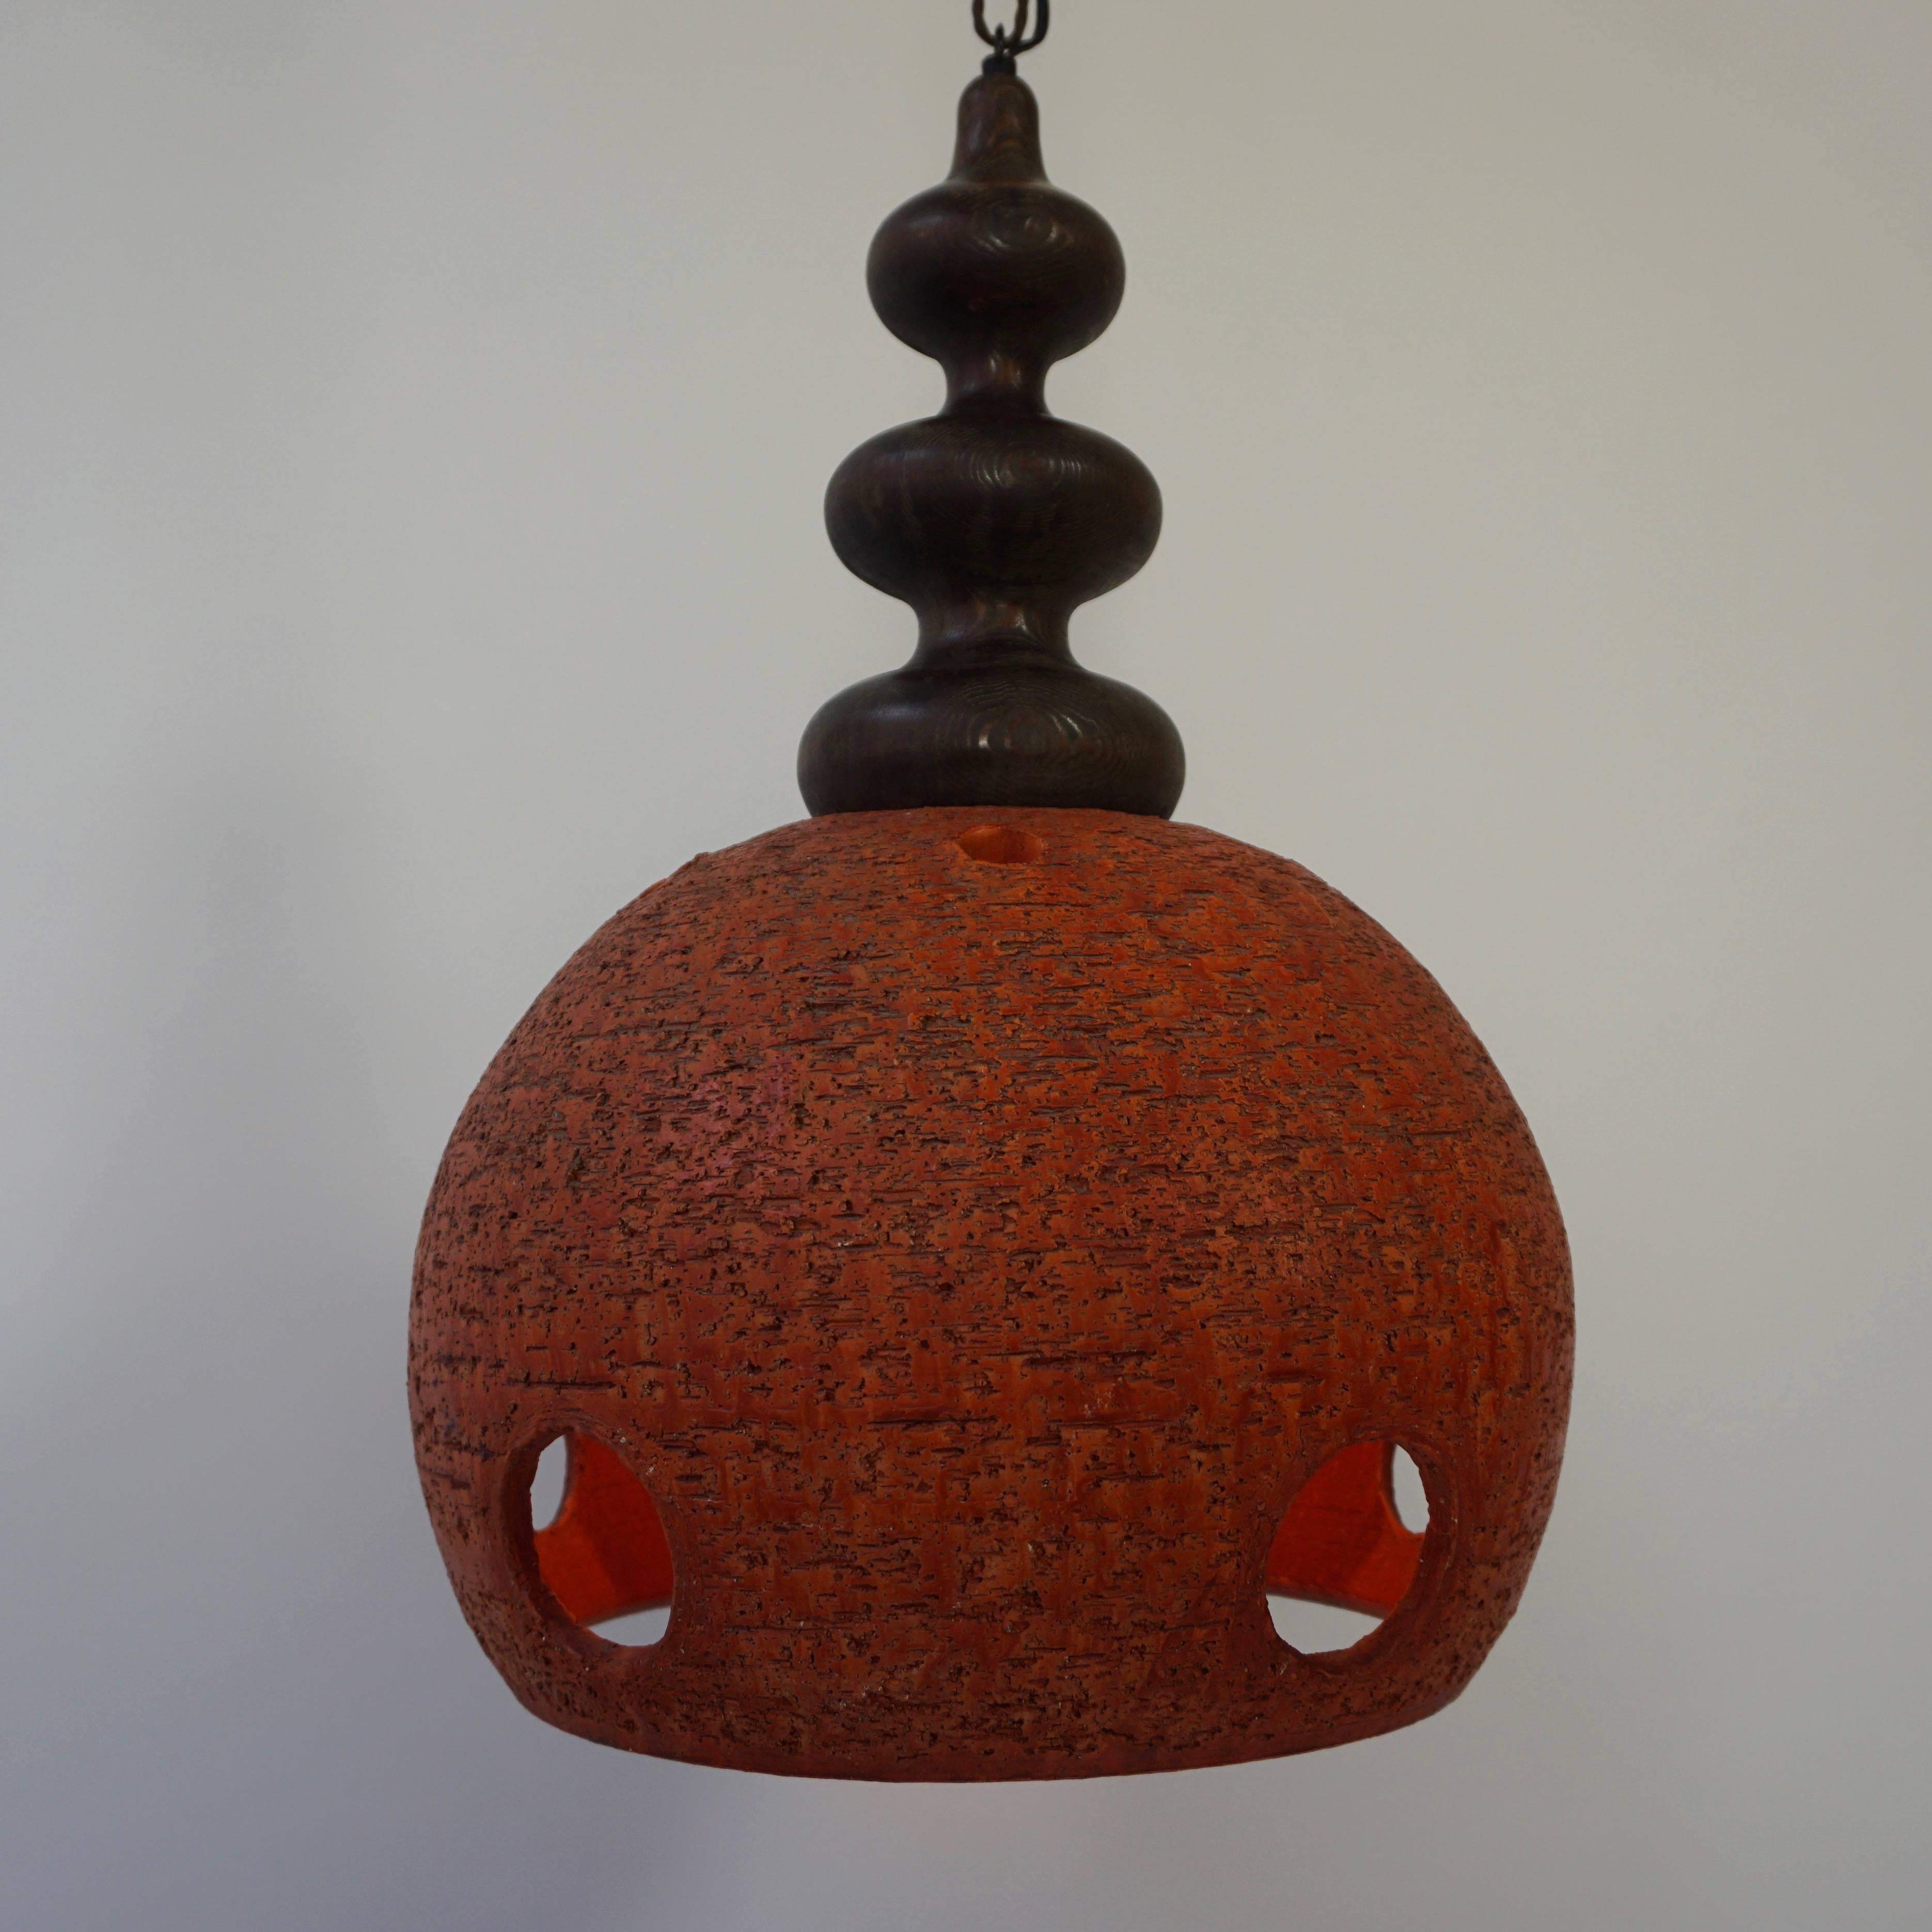 Ceramic and wood pendant light.
Diameter 36 cm.
Height from the ceramic shade is 26 cm.
Total height with the chain is 120 cm.